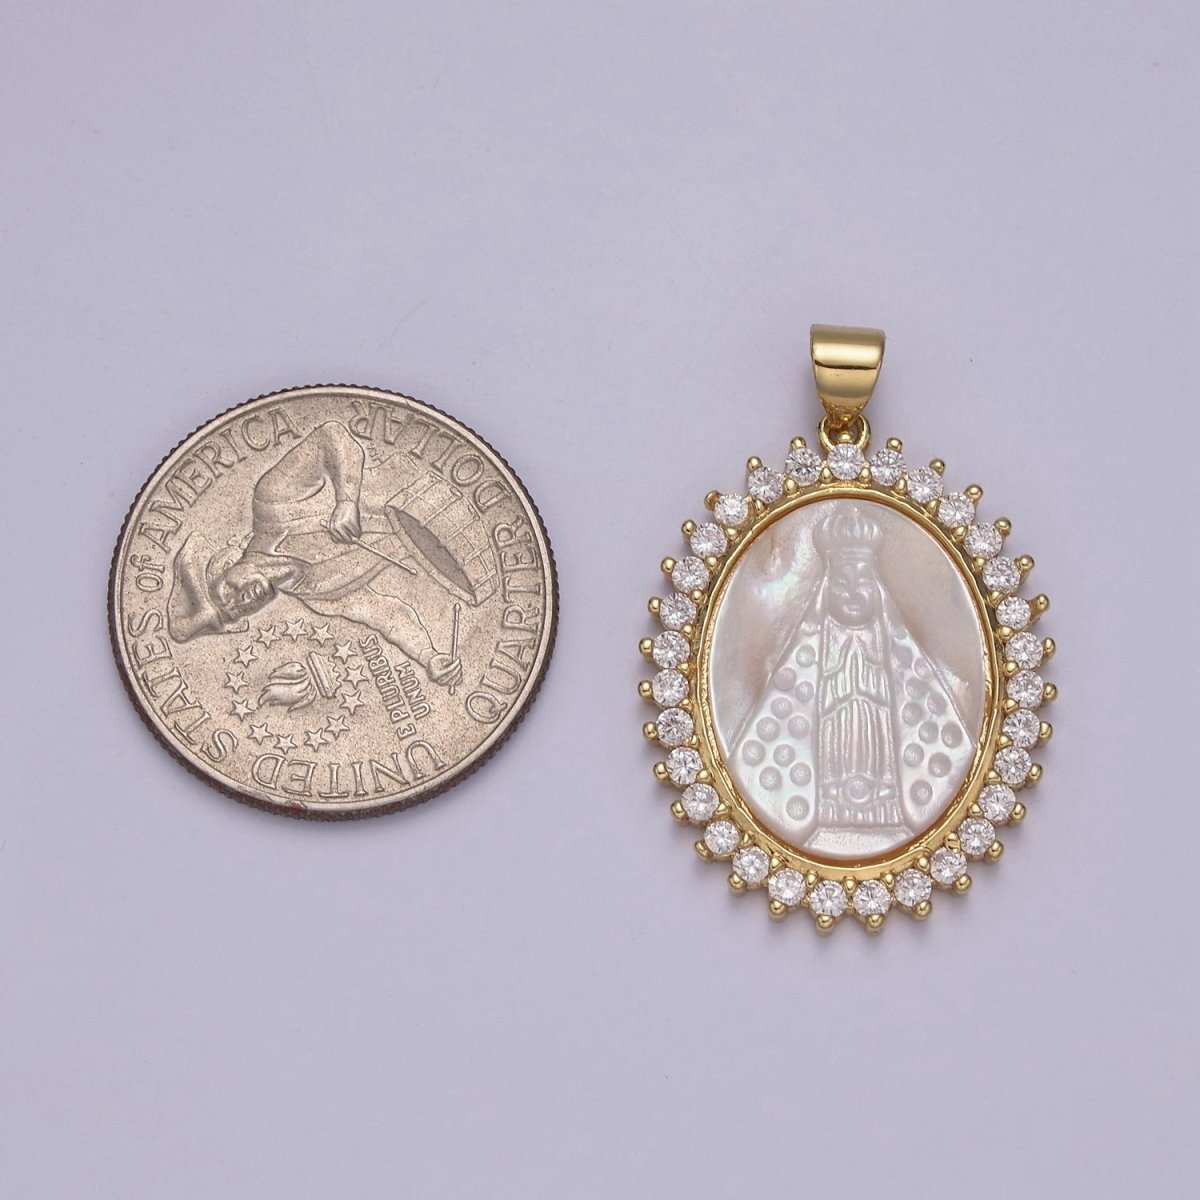 Statement Gold Filled Cubic Zirconia Bezeled Mother Of Pearl Virgin Mary Lady of Guadalupe Pendant Necklace for Religious Jewelry Making N-574 - DLUXCA